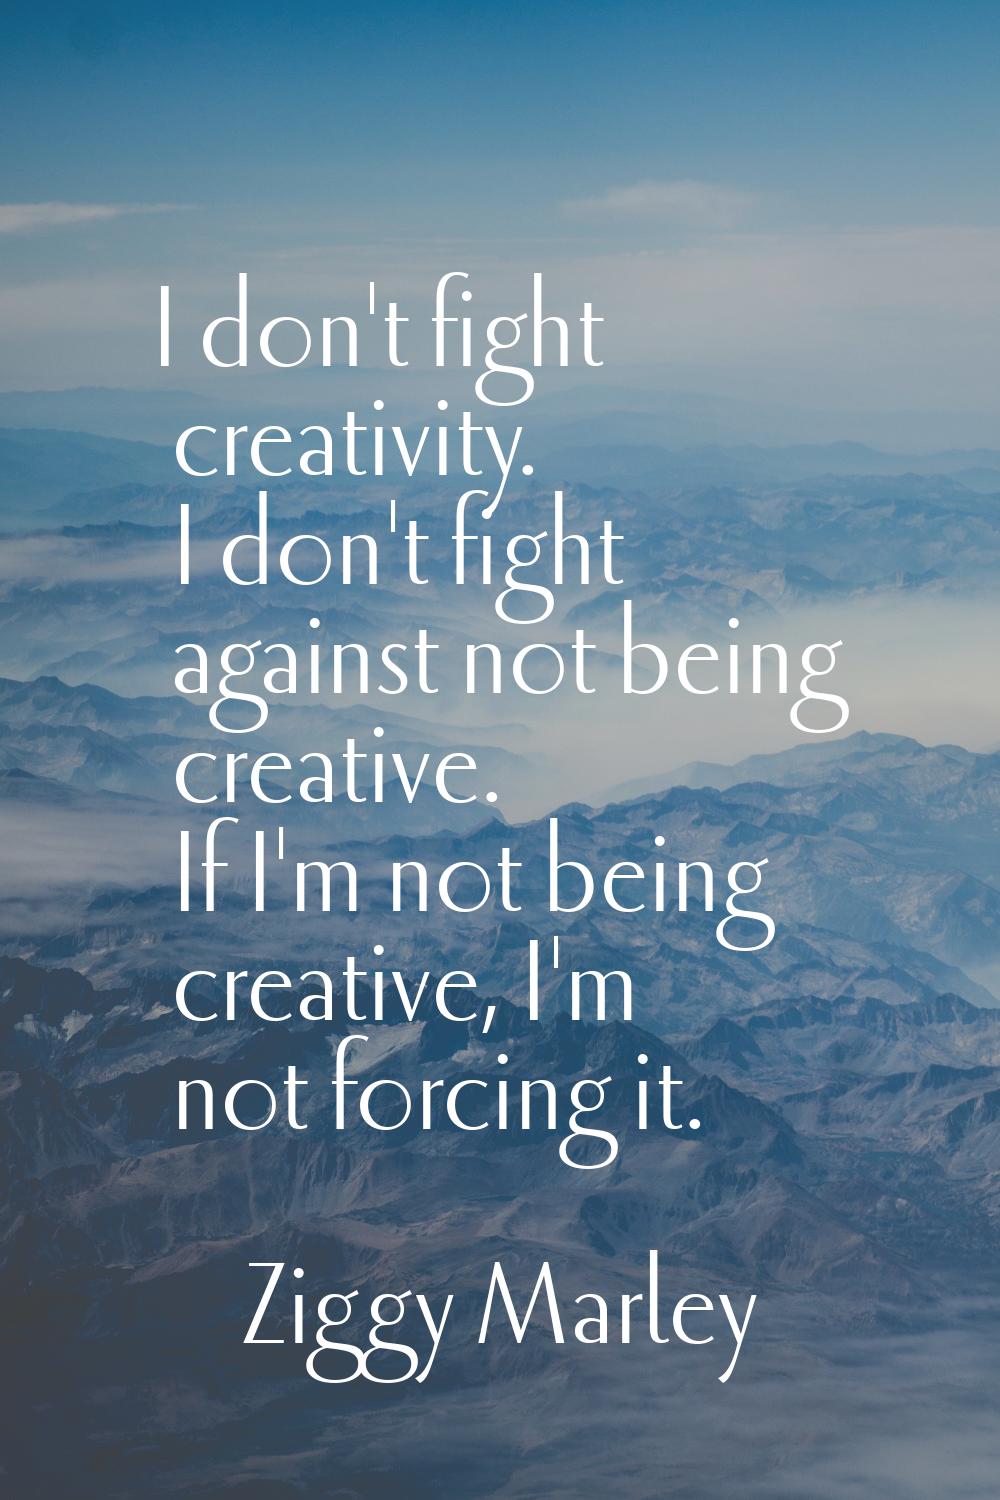 I don't fight creativity. I don't fight against not being creative. If I'm not being creative, I'm 